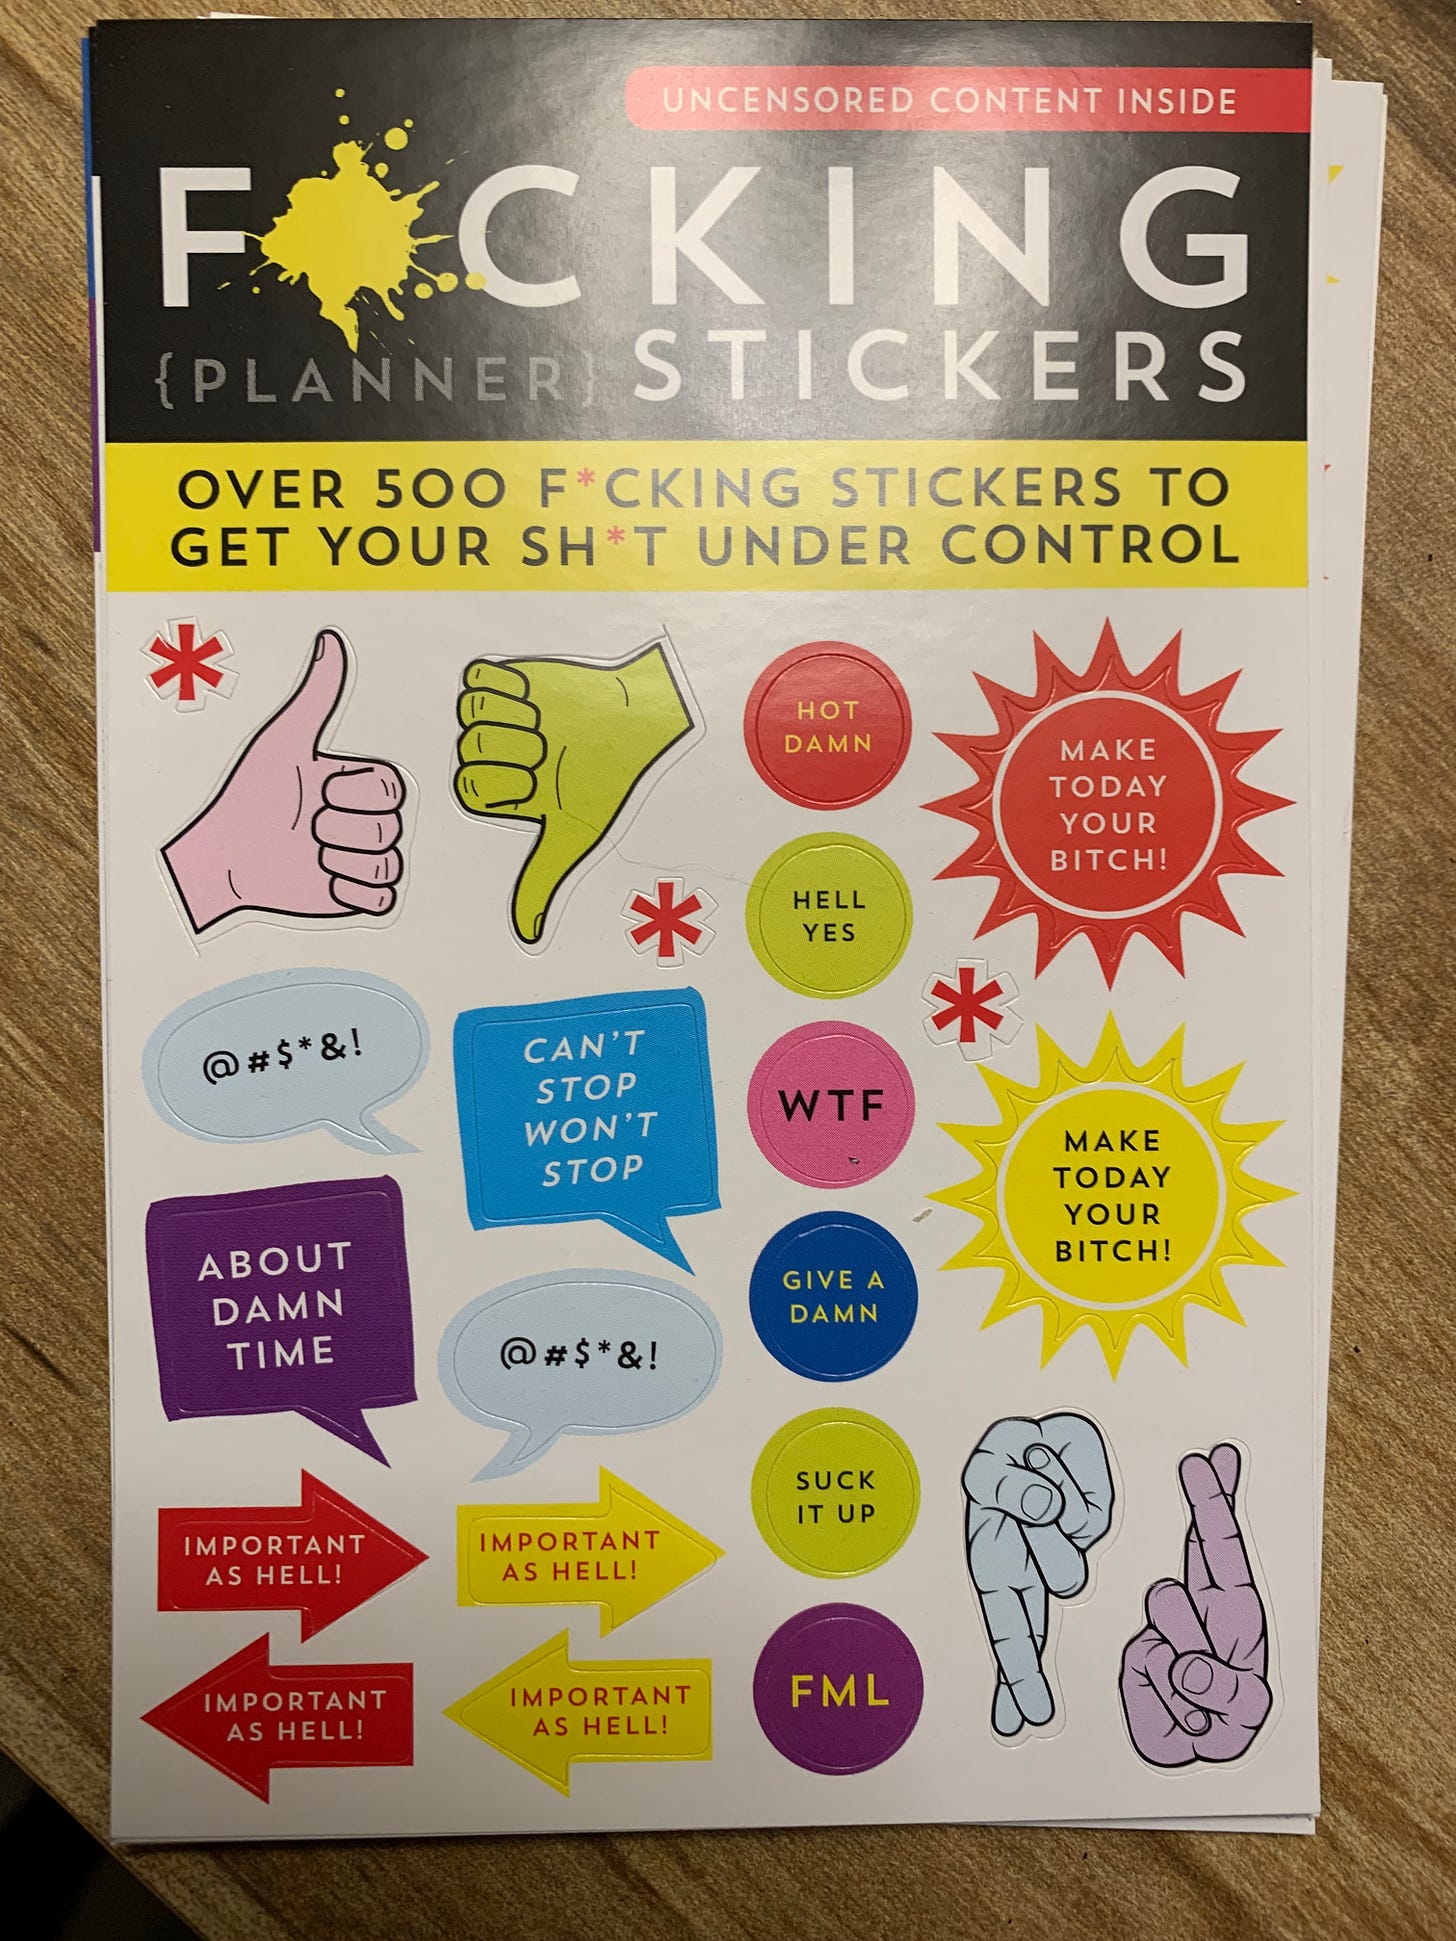 colorful stickers and callouts to use in a planner with cynical and positive messages using slang and bad words